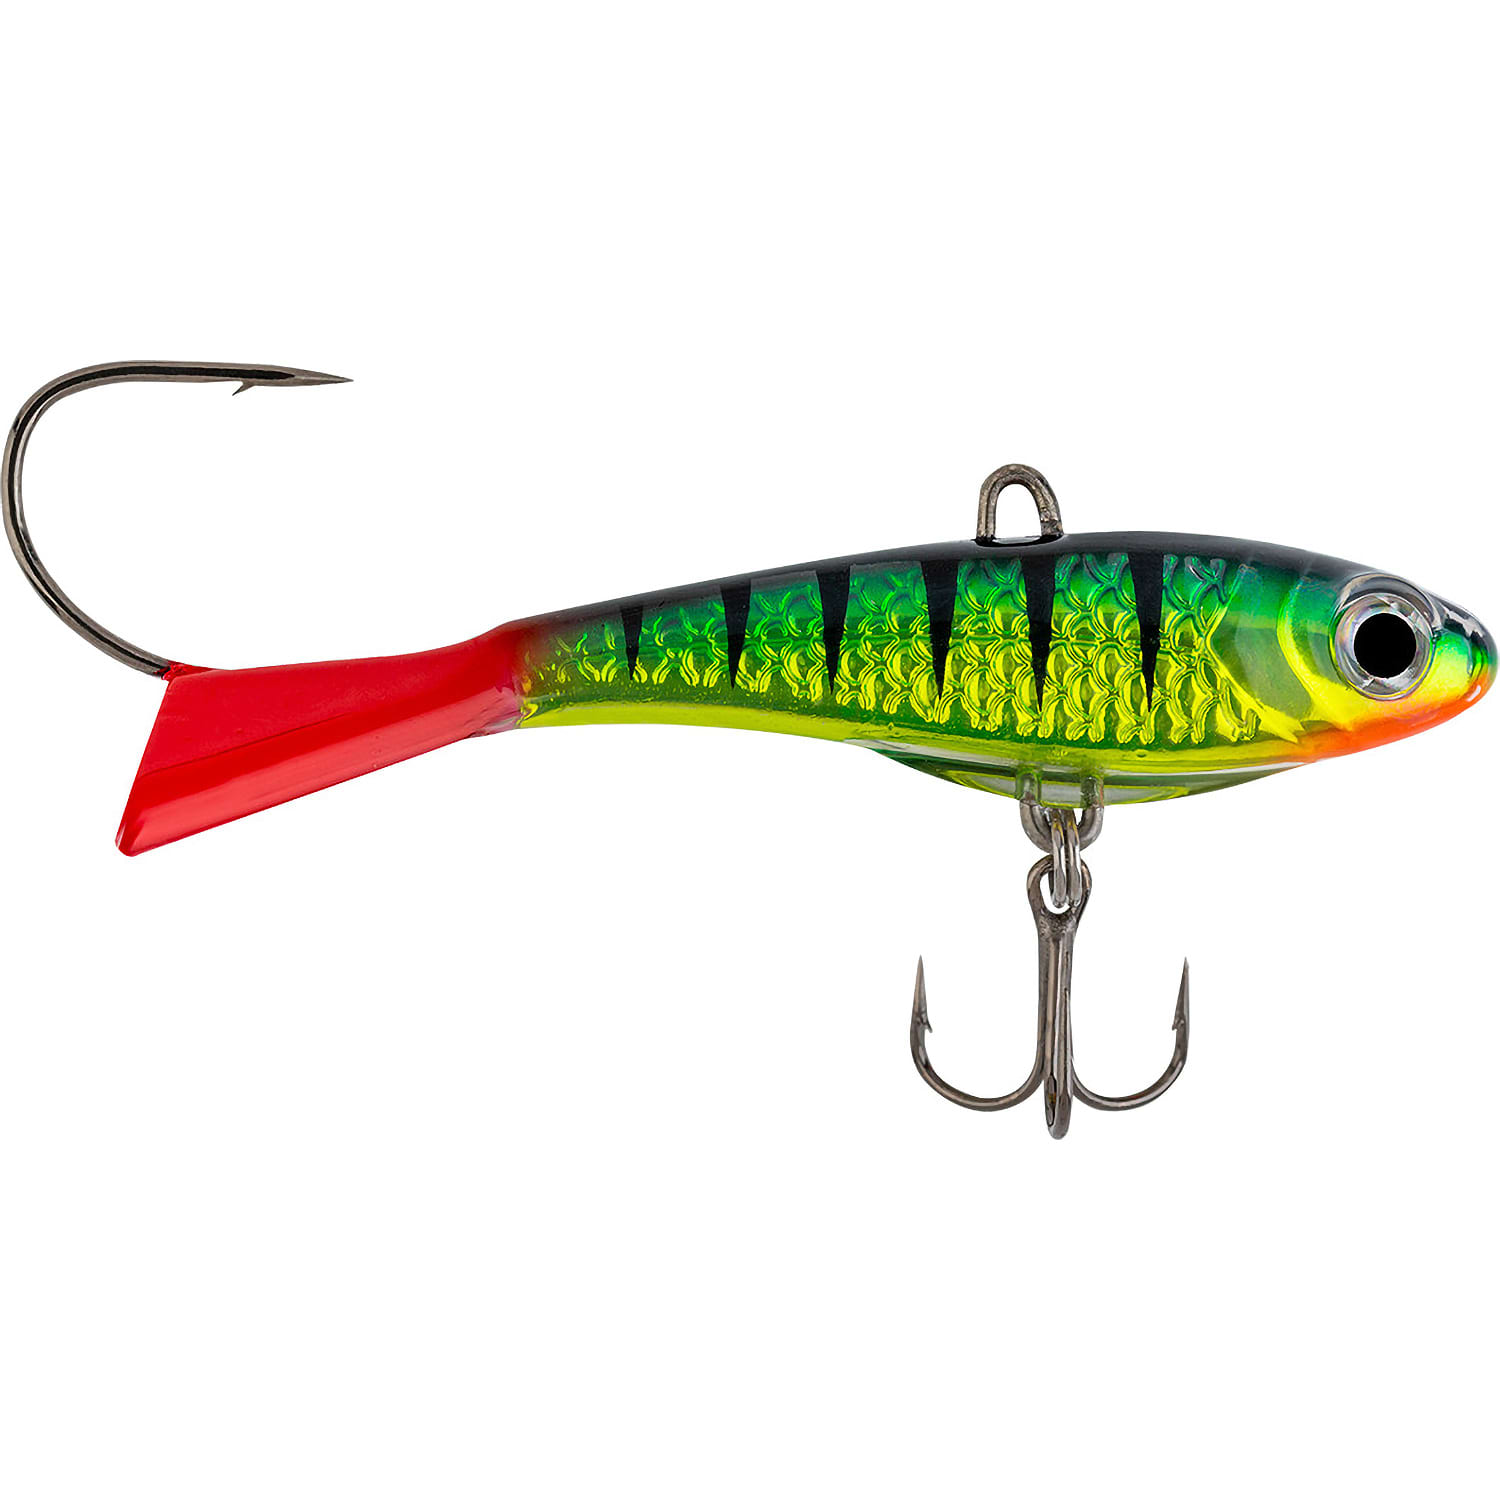 Resin Mold Fishing Lure -  Canada